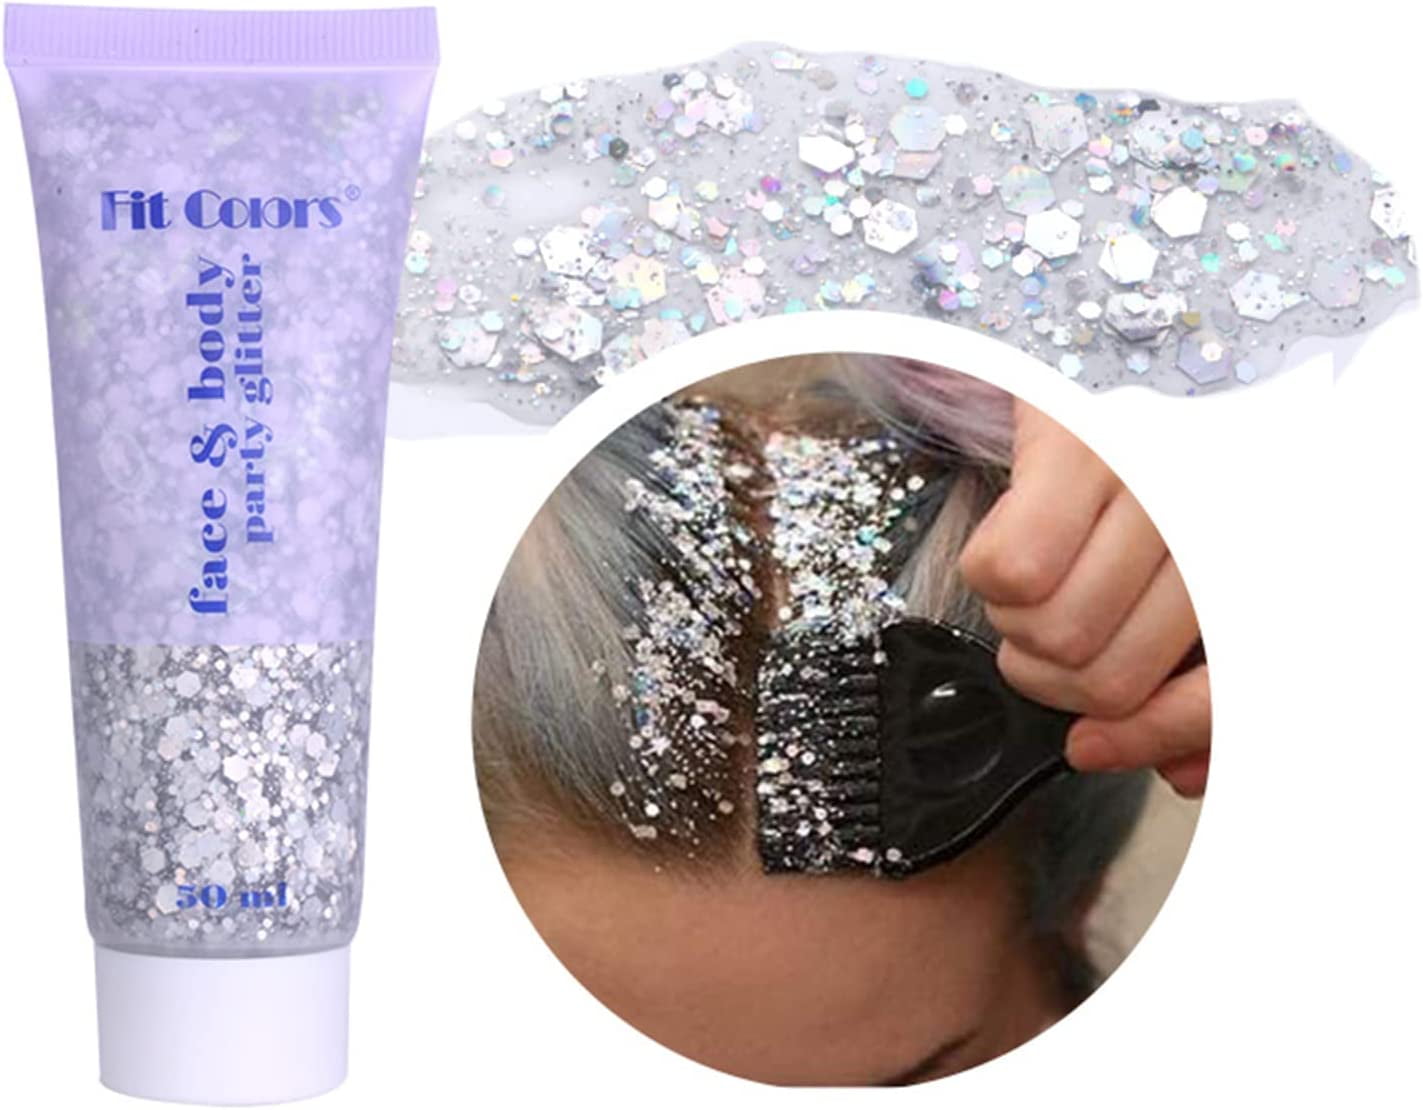 Festival Glitter: How To Apply And Remove Glitter Like A Total Pro